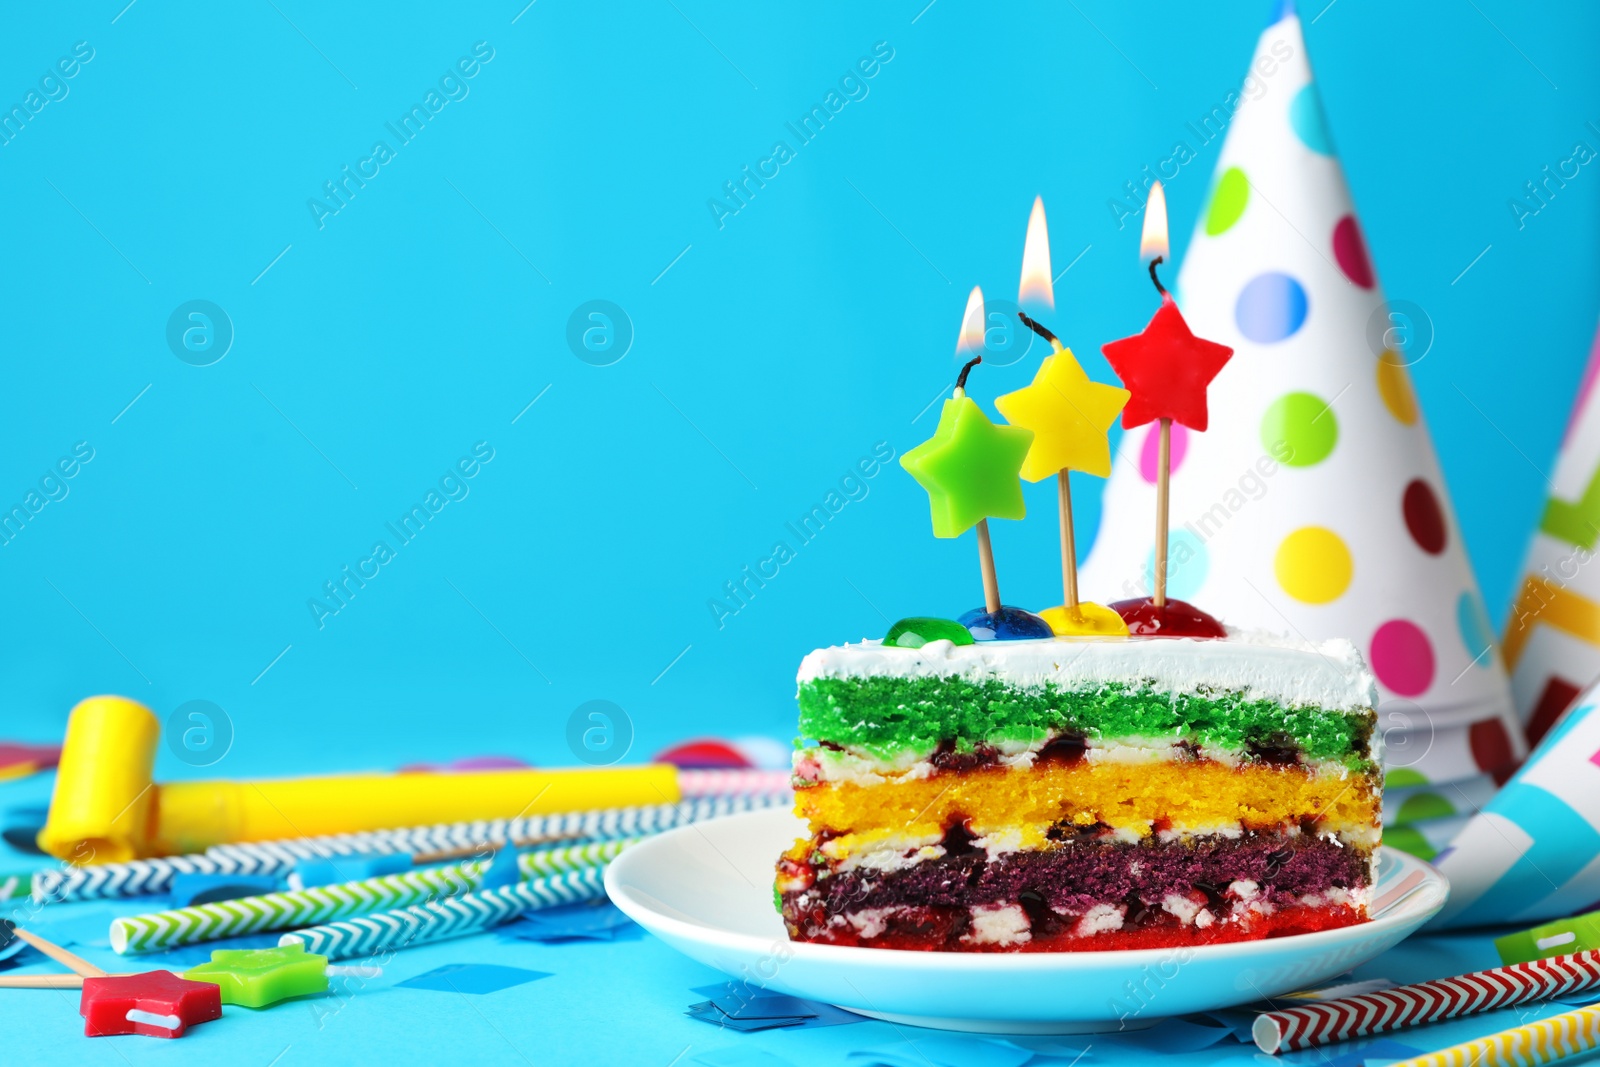 Photo of Piece of cake with candles and birthday decor on light blue background, space for text